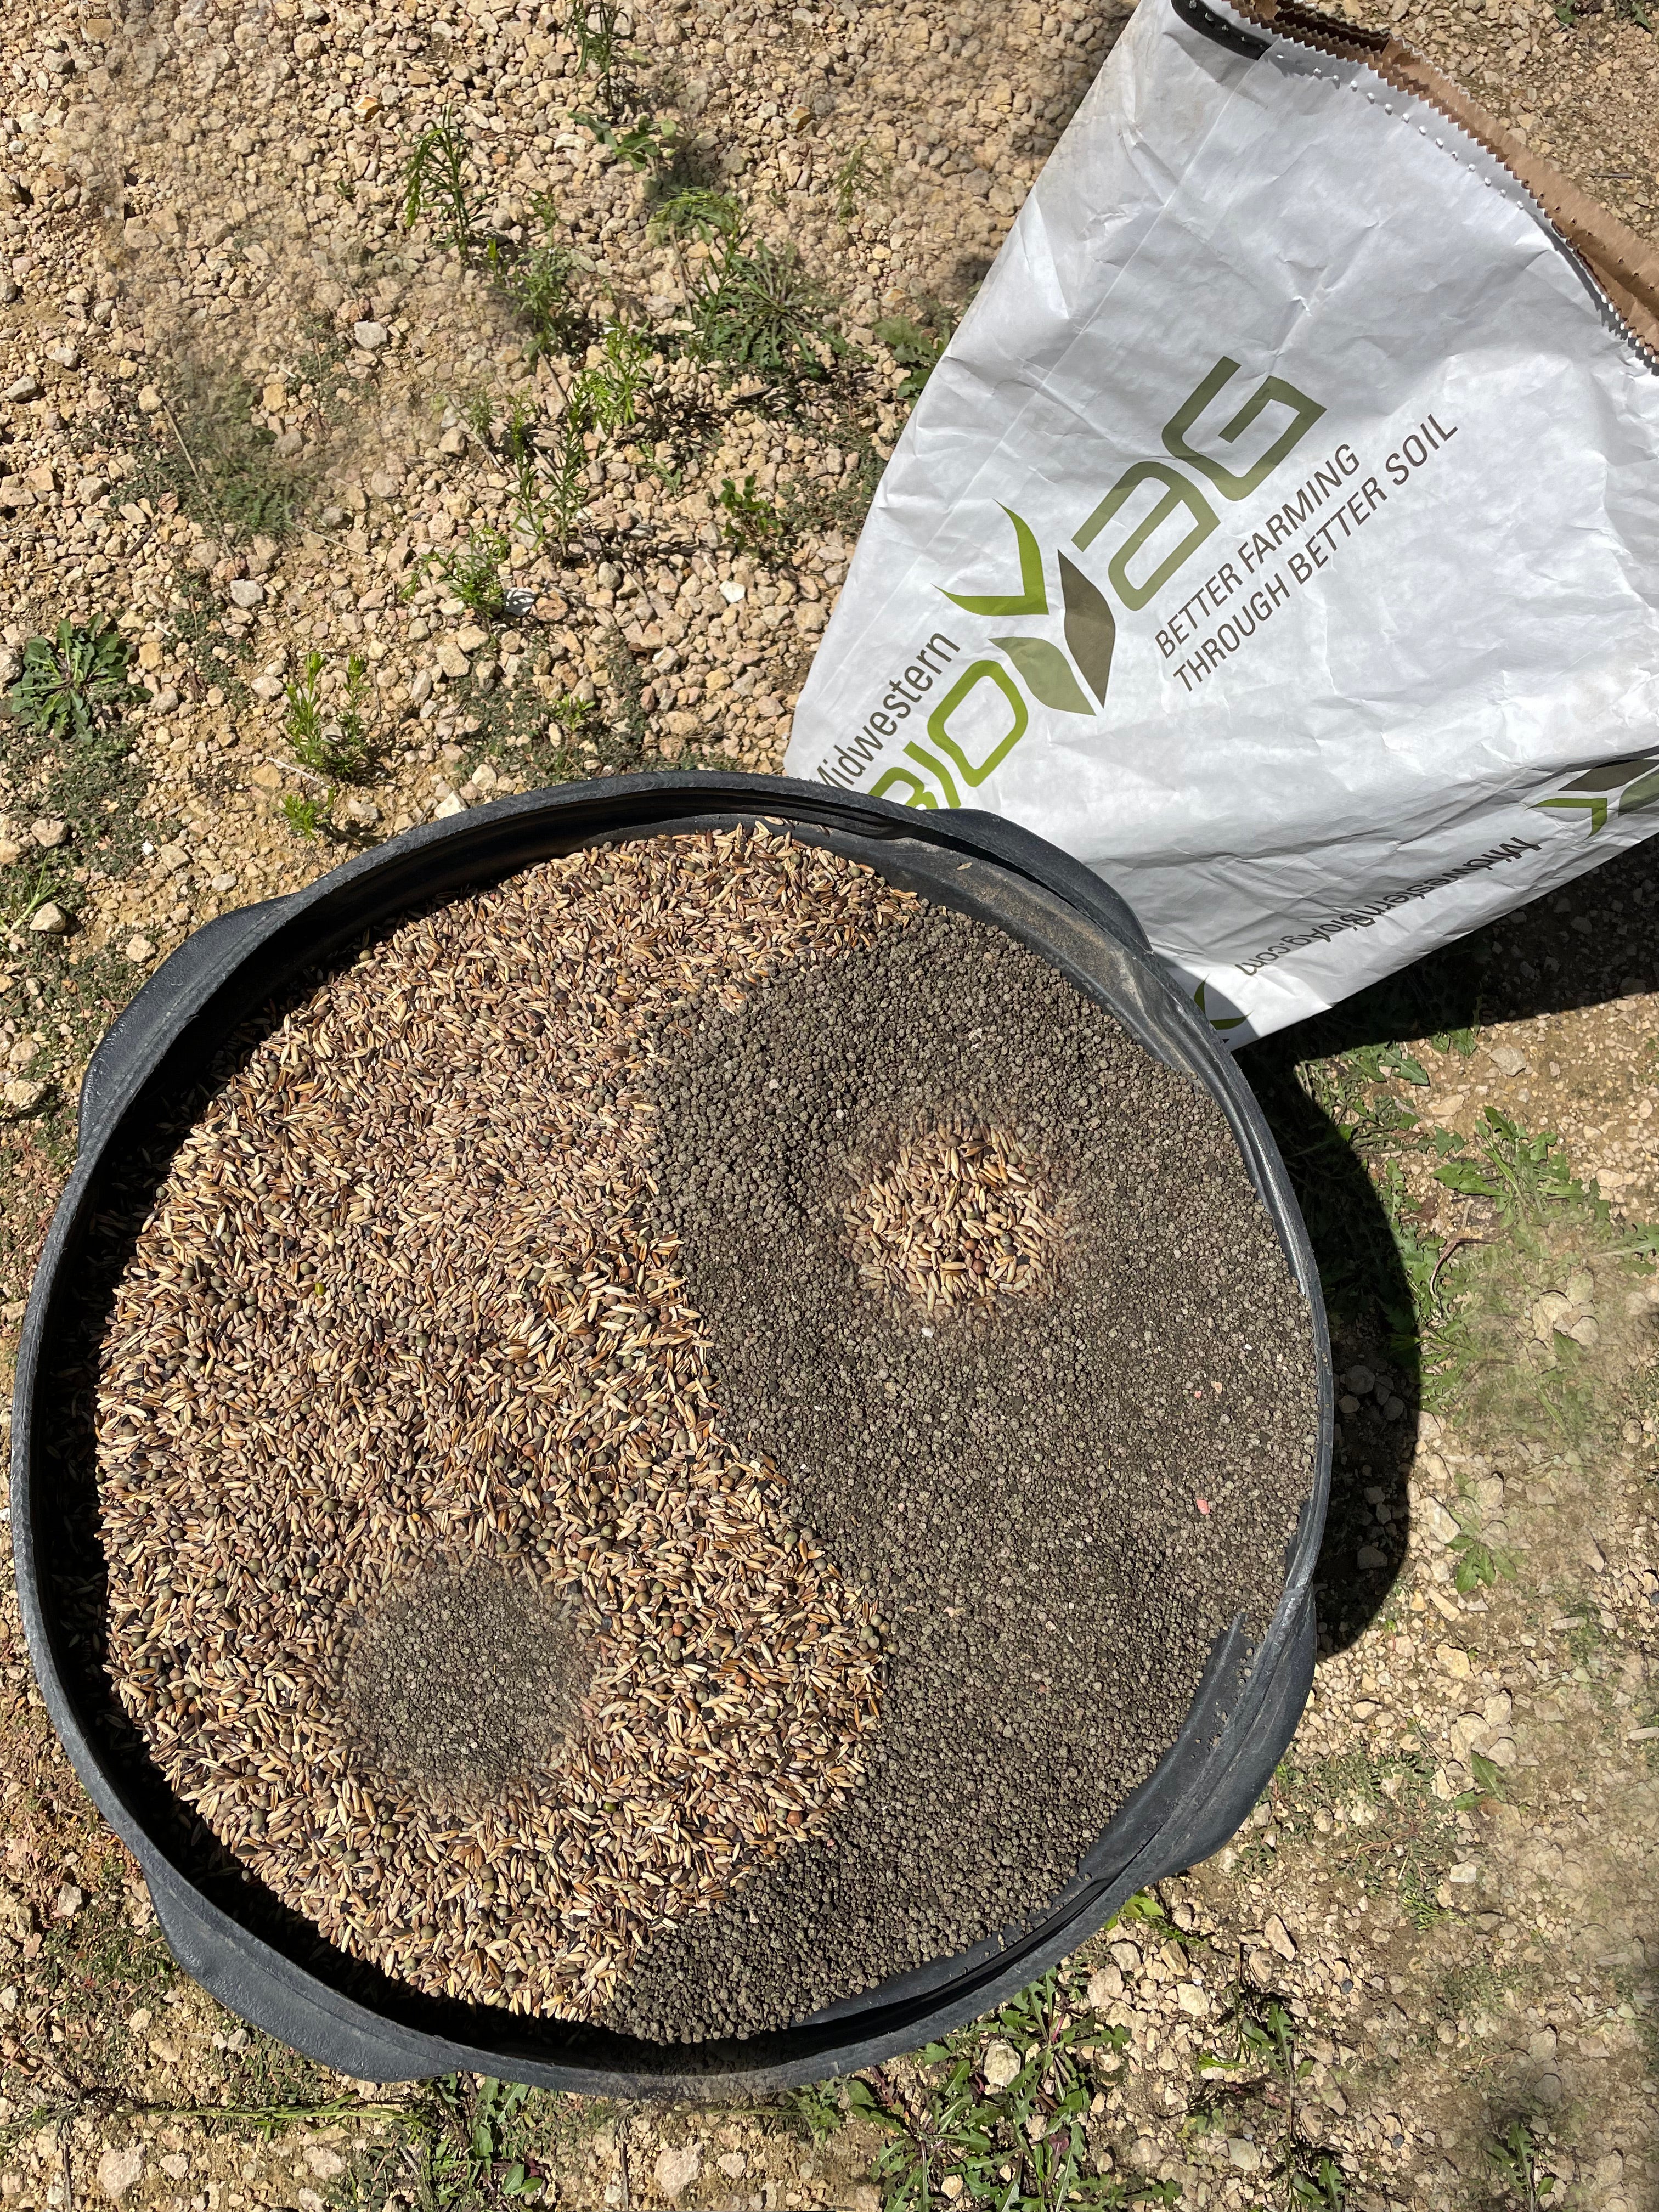 TerraNu fertilizers are non-corrosive, so they can be mixed with seed for one-pass application. 